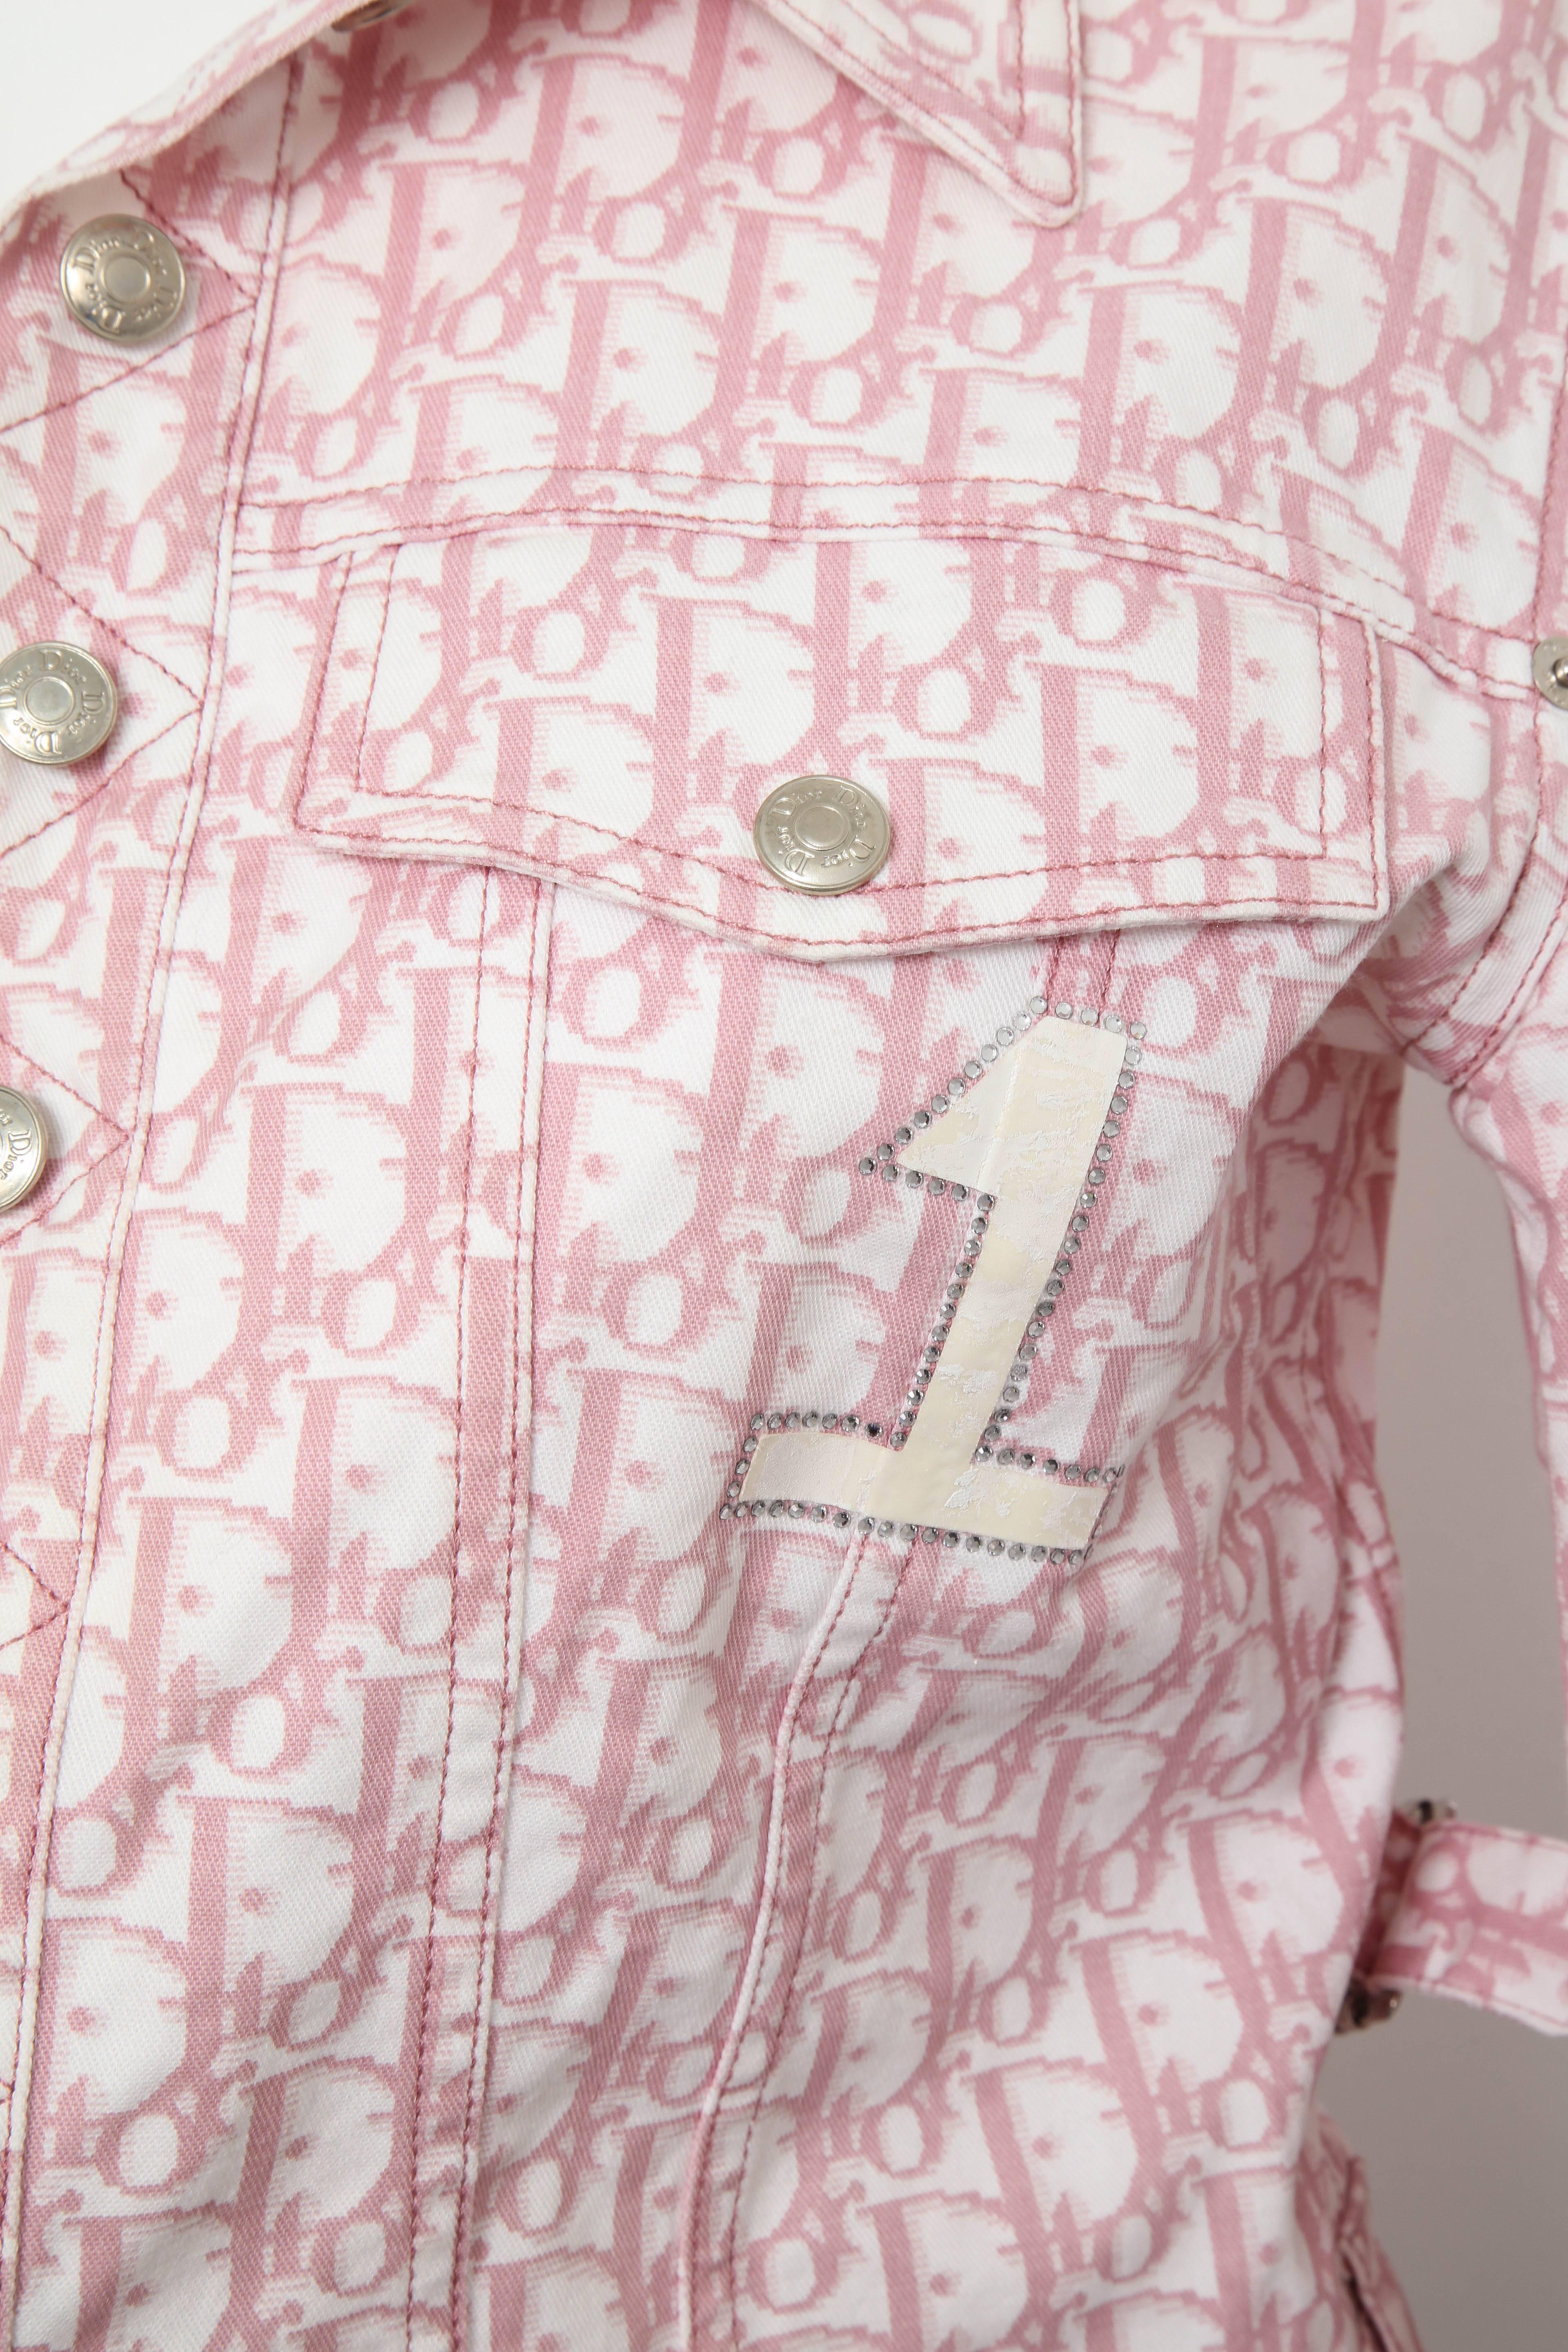 Very rare John Galliano for Christian Dior pink trotter logo denim jacket.
French size 38